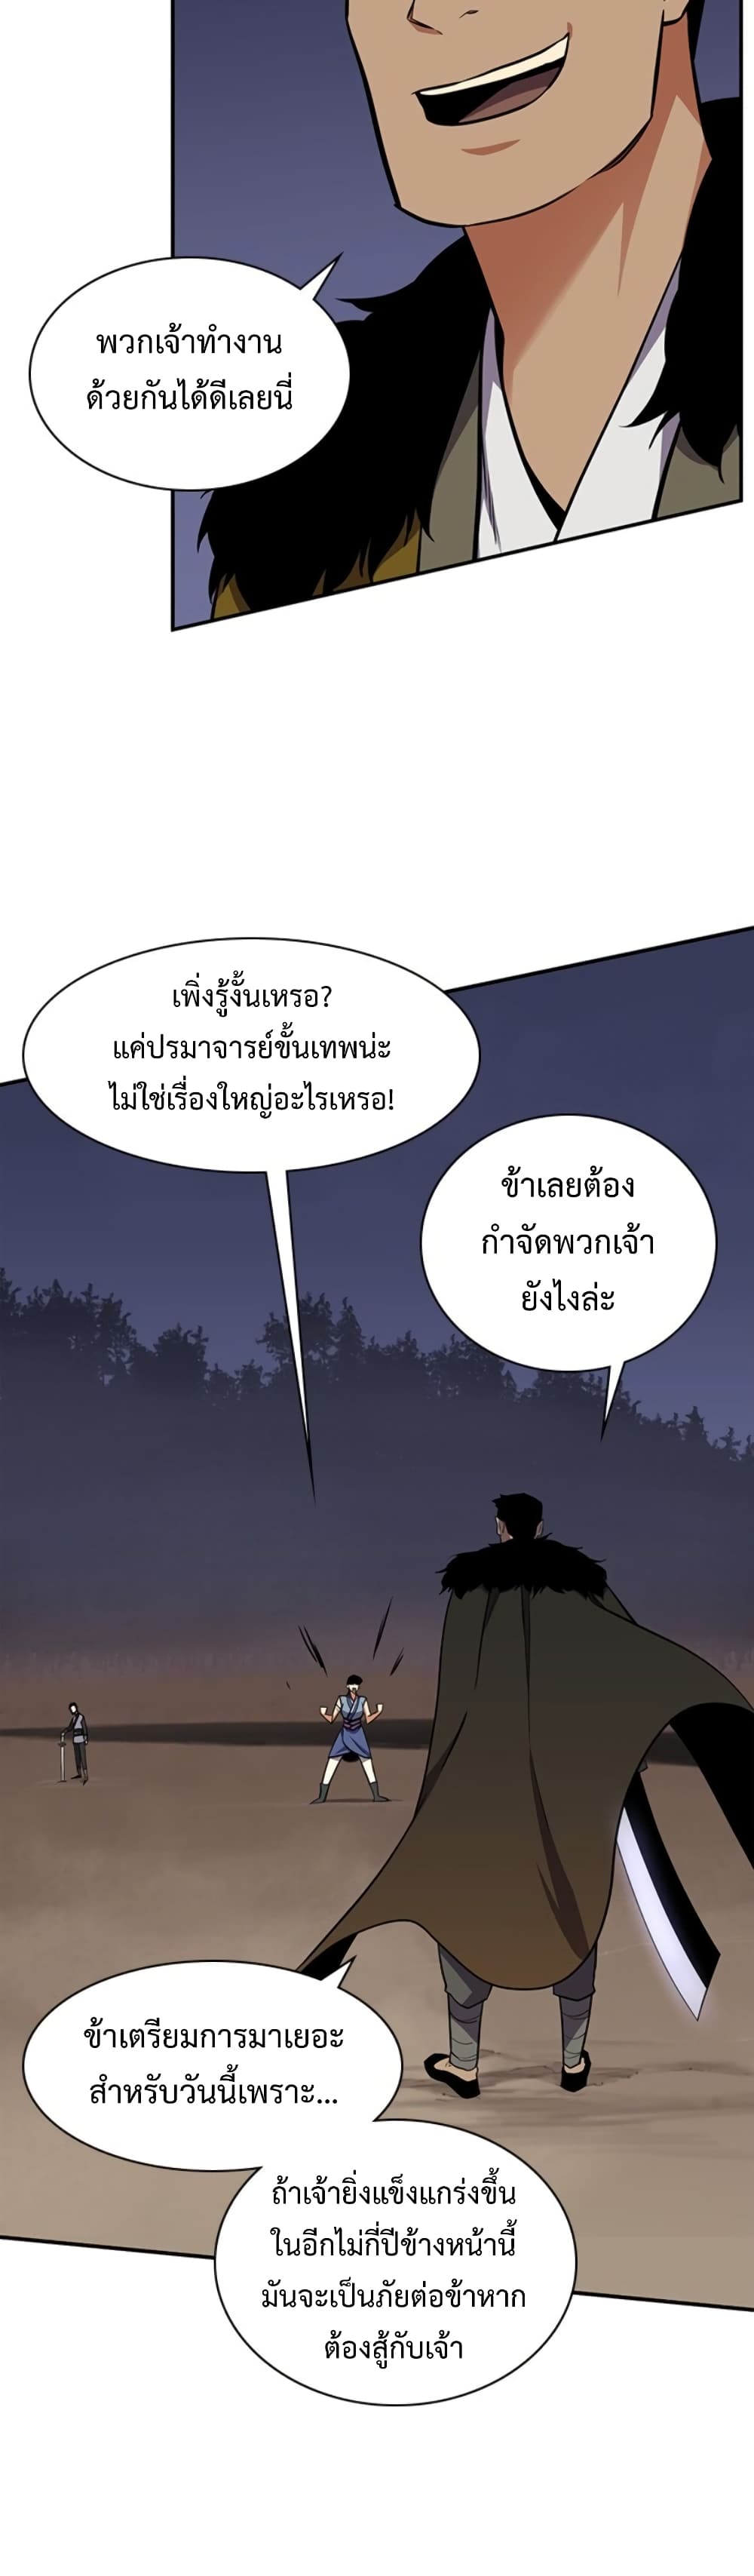 The Strongest Ever à¸à¸­à¸à¸à¸µà¹ 29 (29)